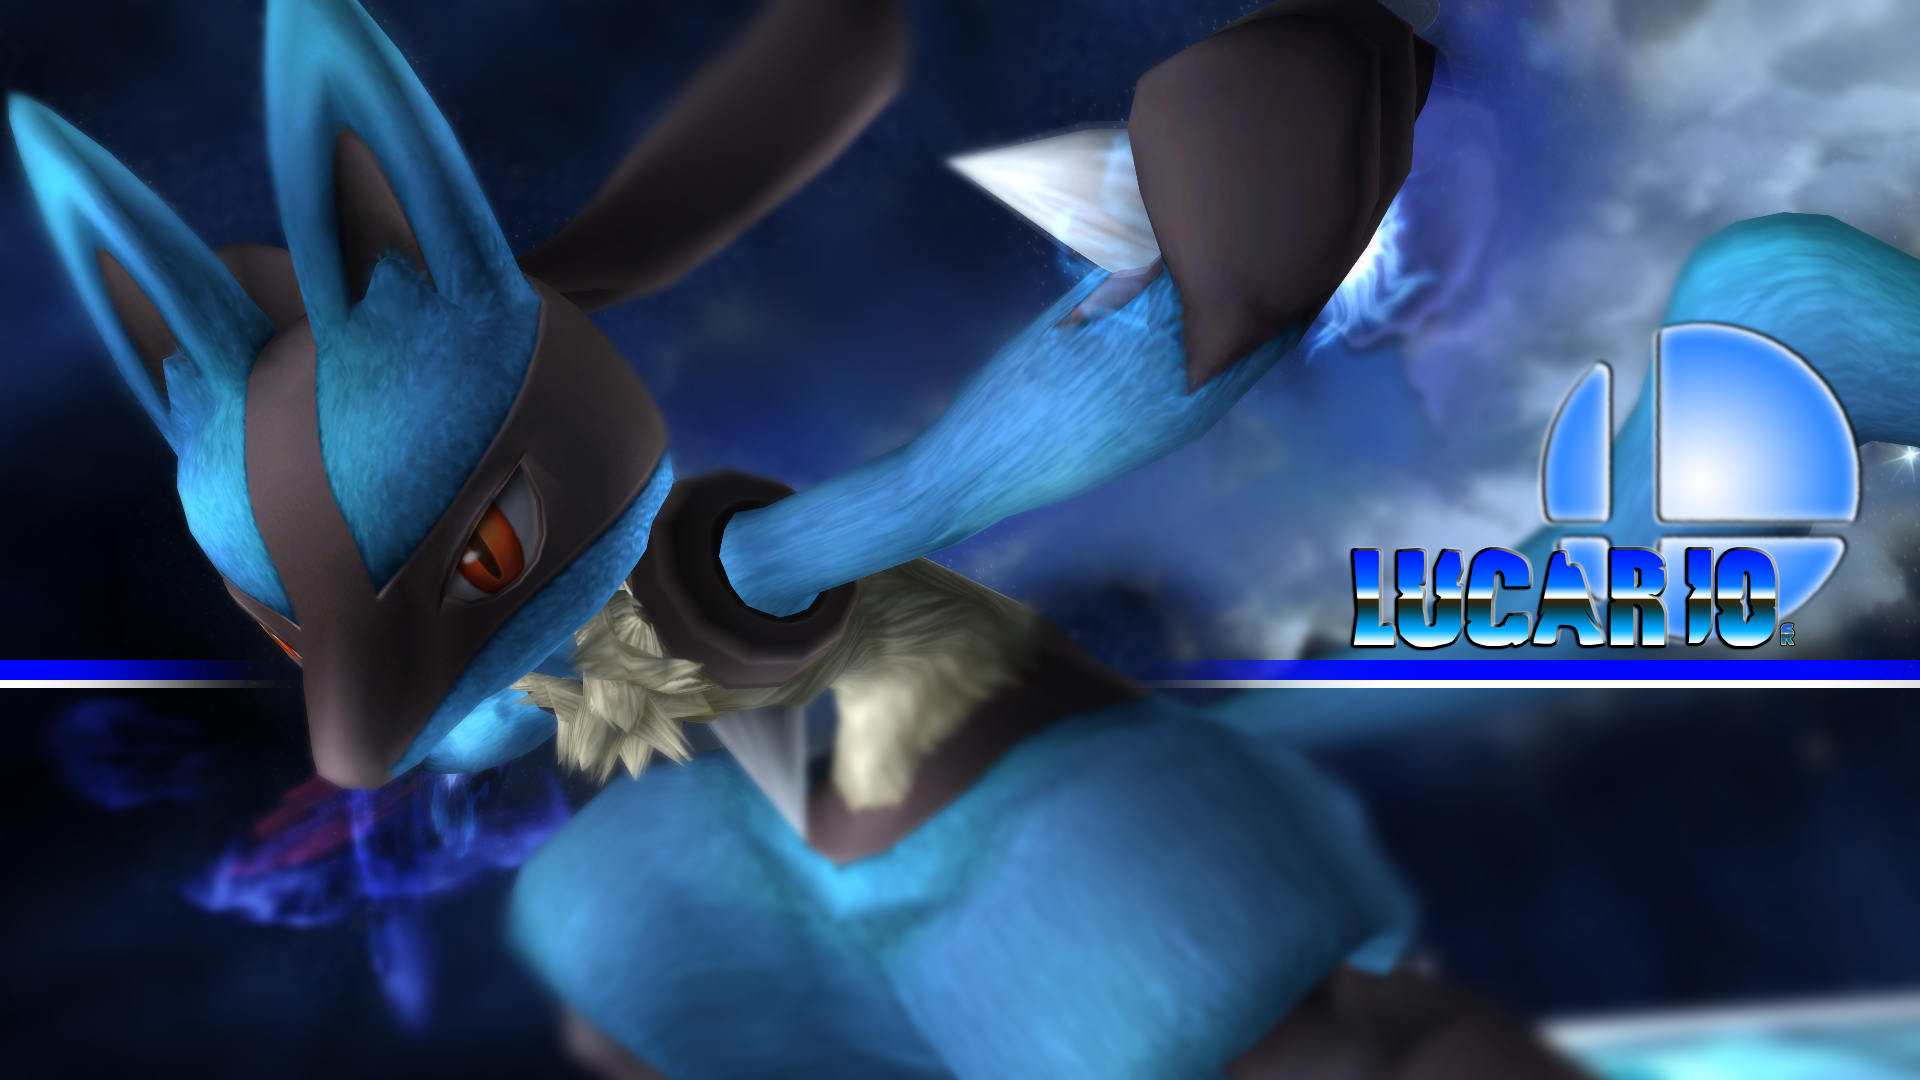 SSBB Lucario Wallpaper by RealSonicSpeed on